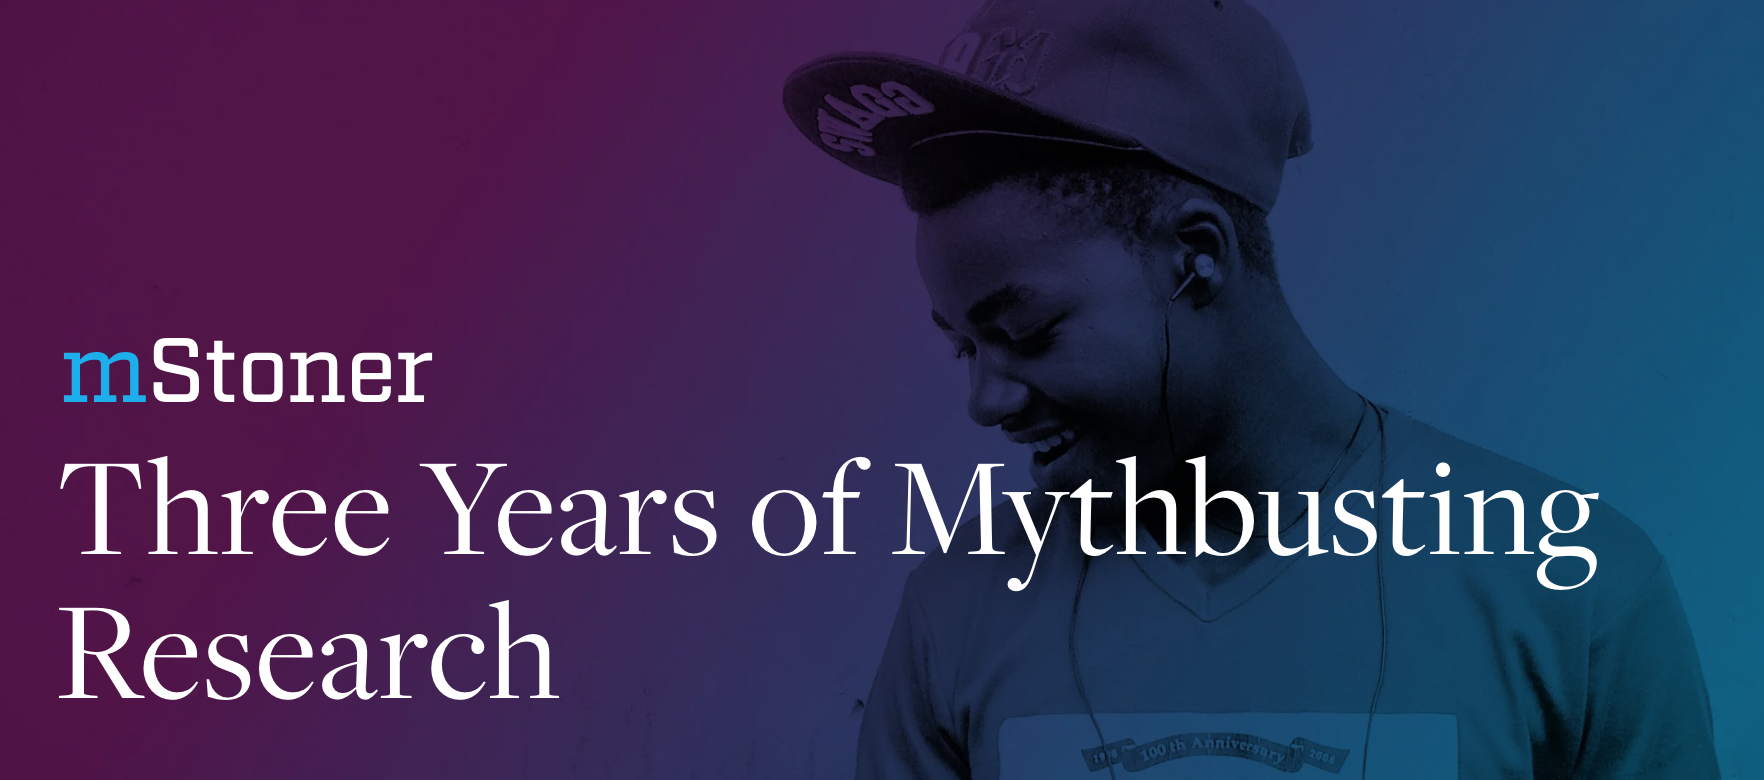 mStoner Three Years of Mythbusting Research